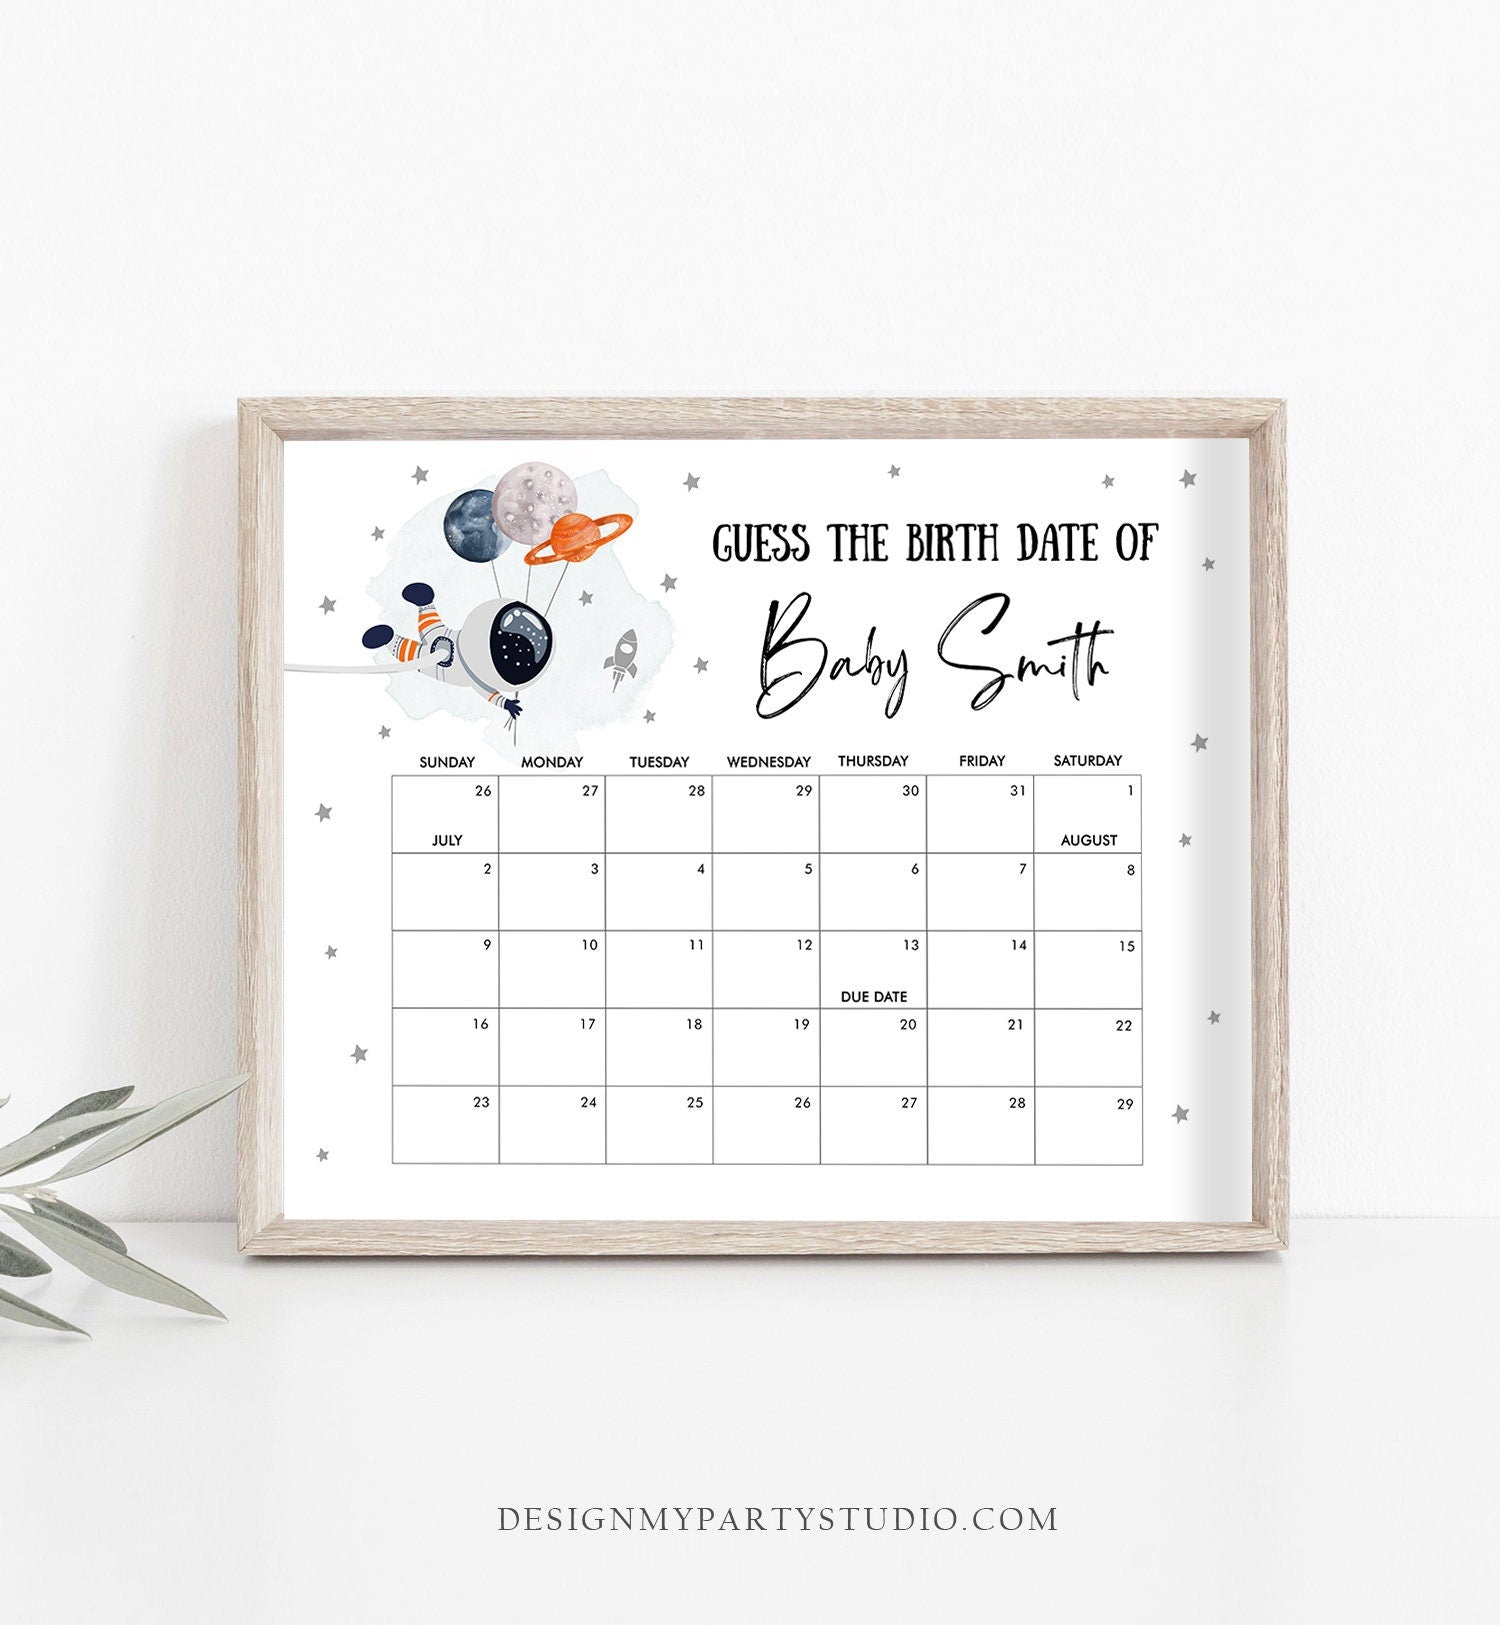 Editable Guess the Birth Date Baby Shower Game Guess Birthday Outer Space Astronaut Planets Galaxy Houston Corjl Template Printable 0366